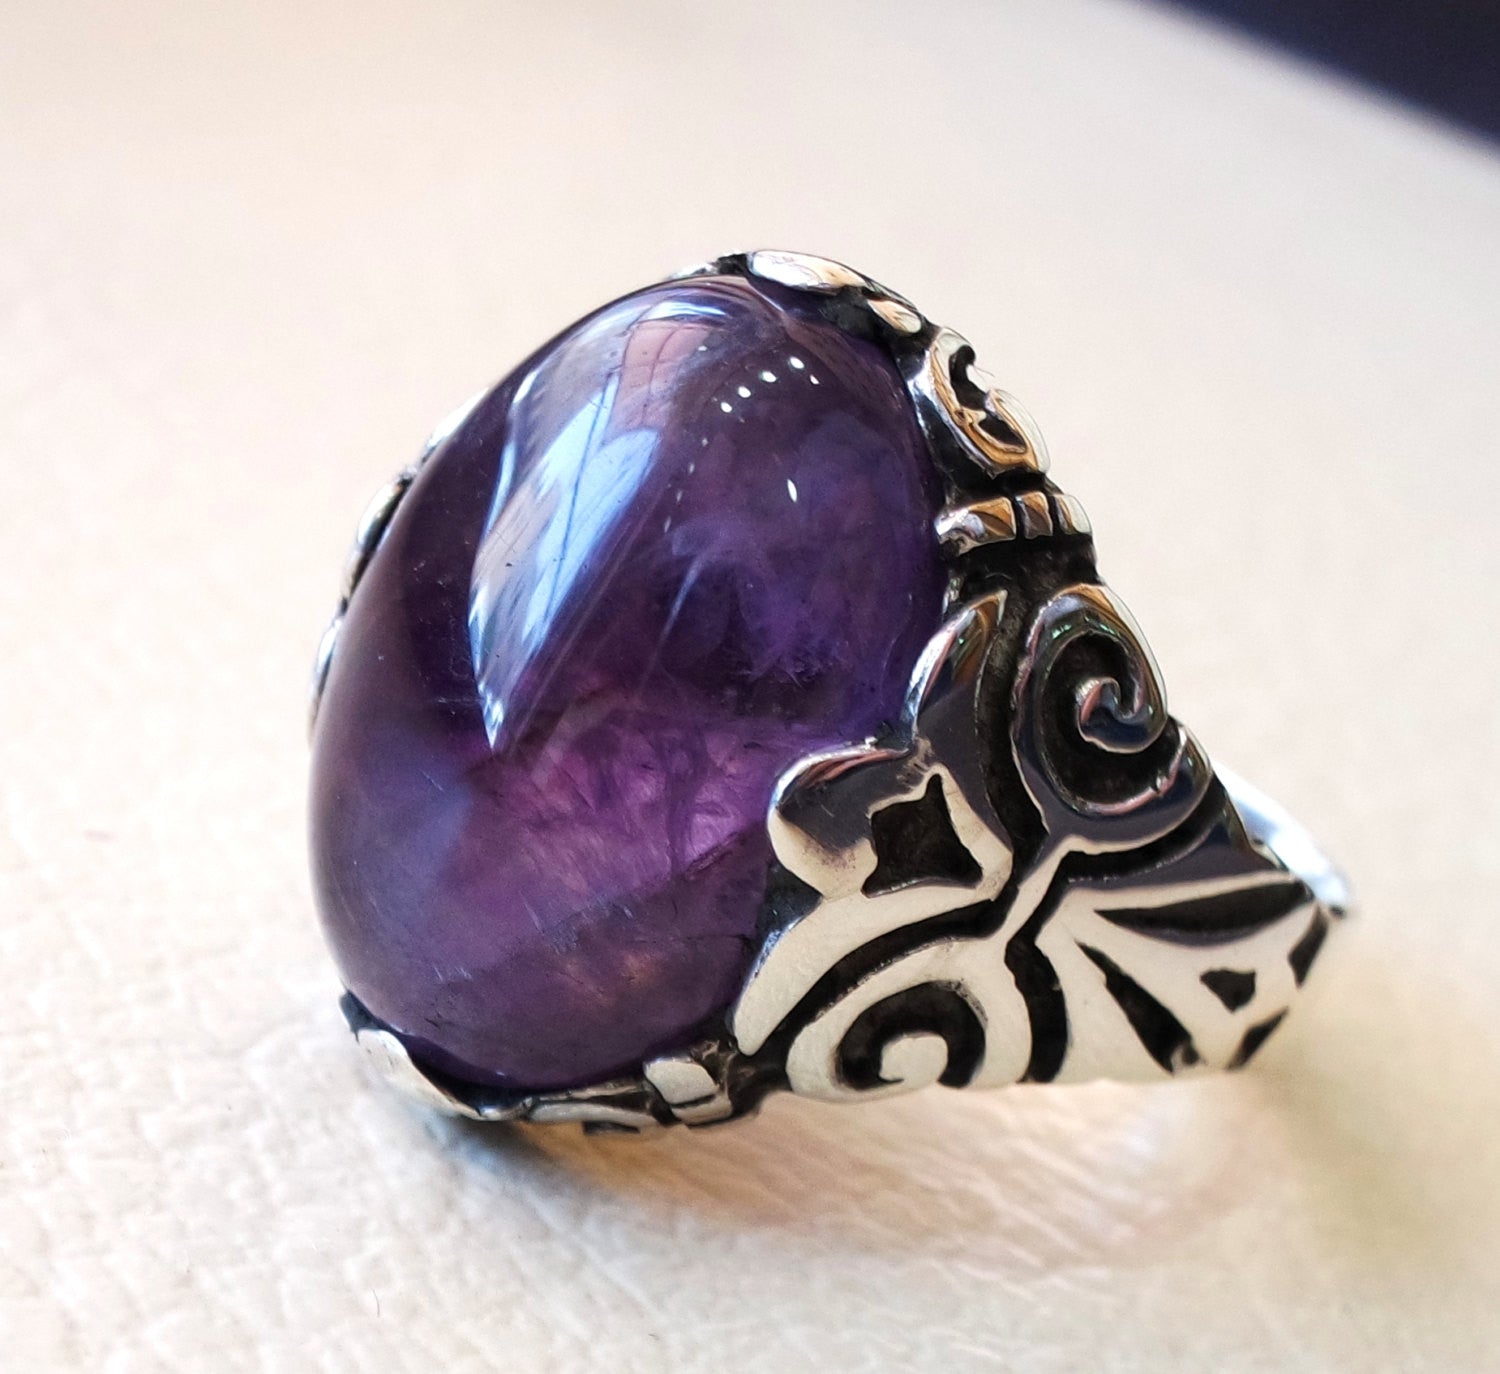 amethyst agate natural cabochon sterling silver 925 men ring vintage arabic turkish ottoman antique style jewelry oval purple gem all sizes